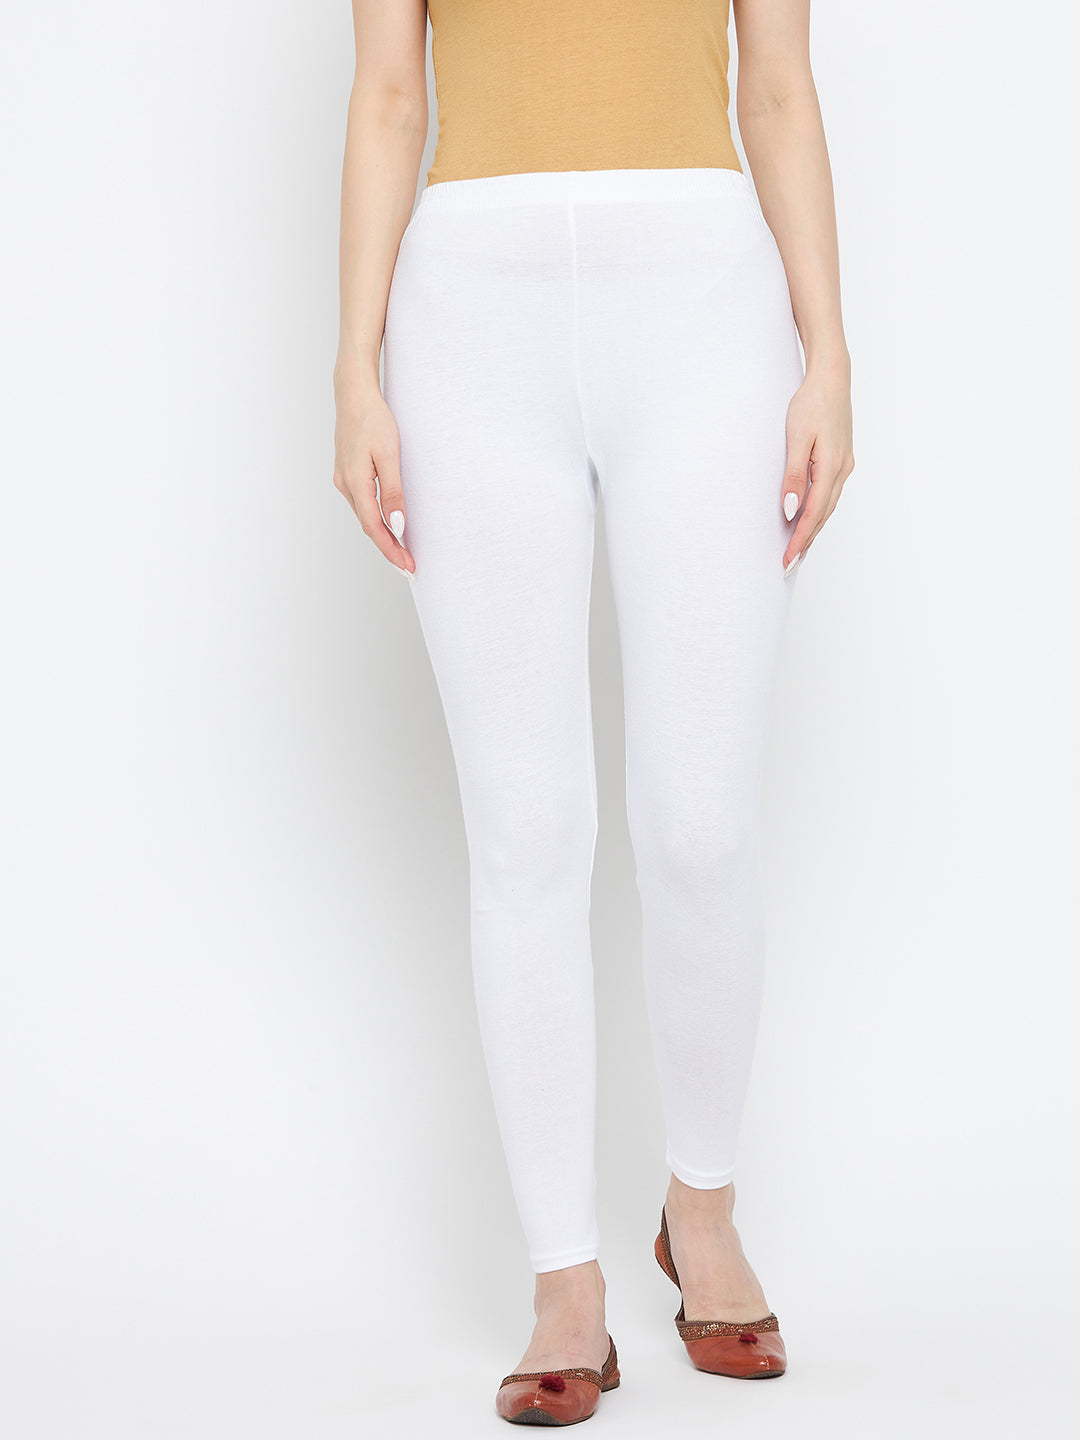 Off-White-Solid-Ankle-Length-Leggings-CC42729